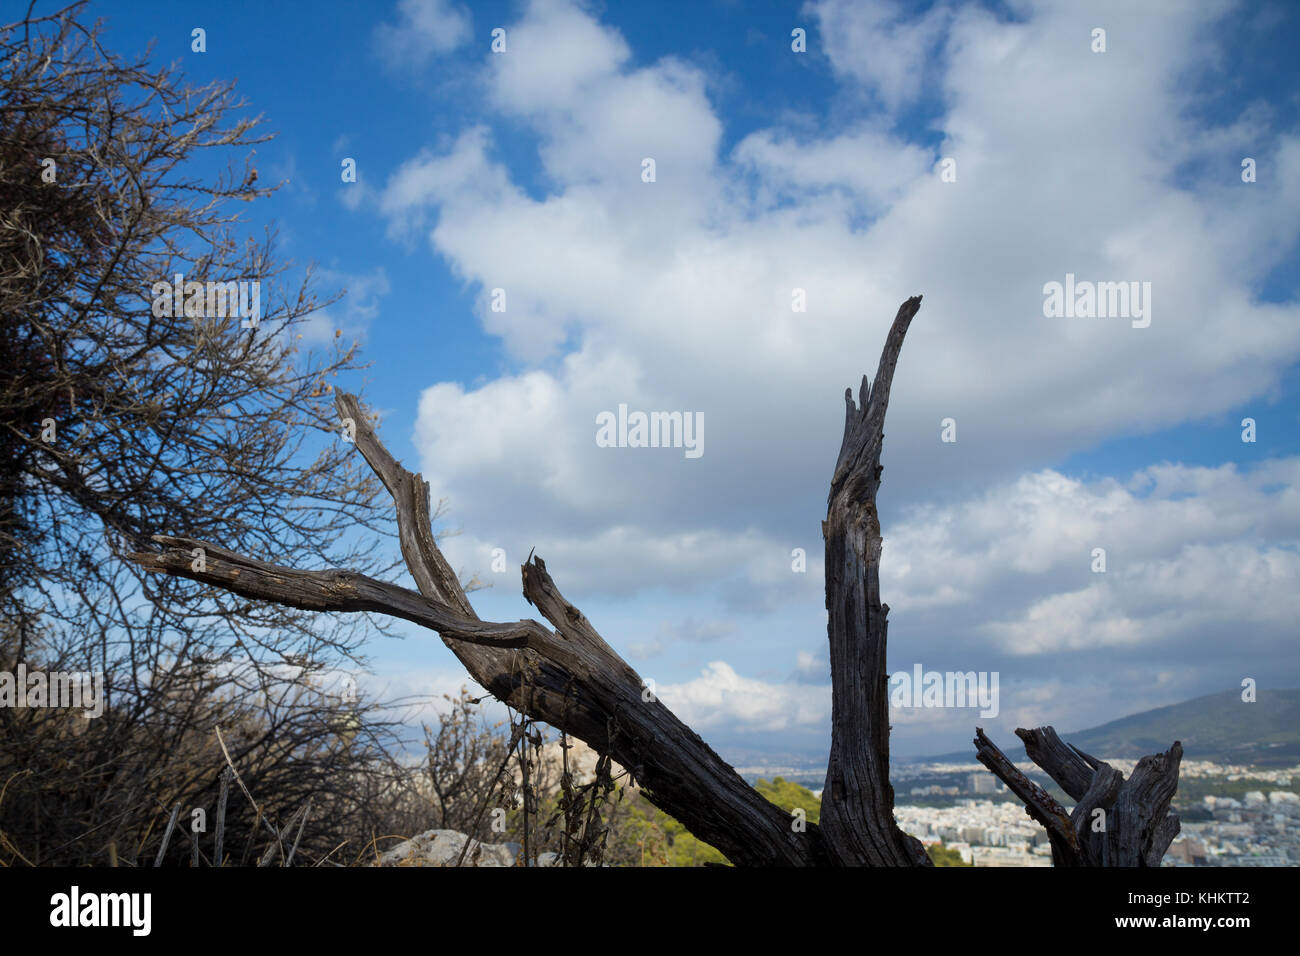 A log on the hill contradicts the view of the city below Stock Photo